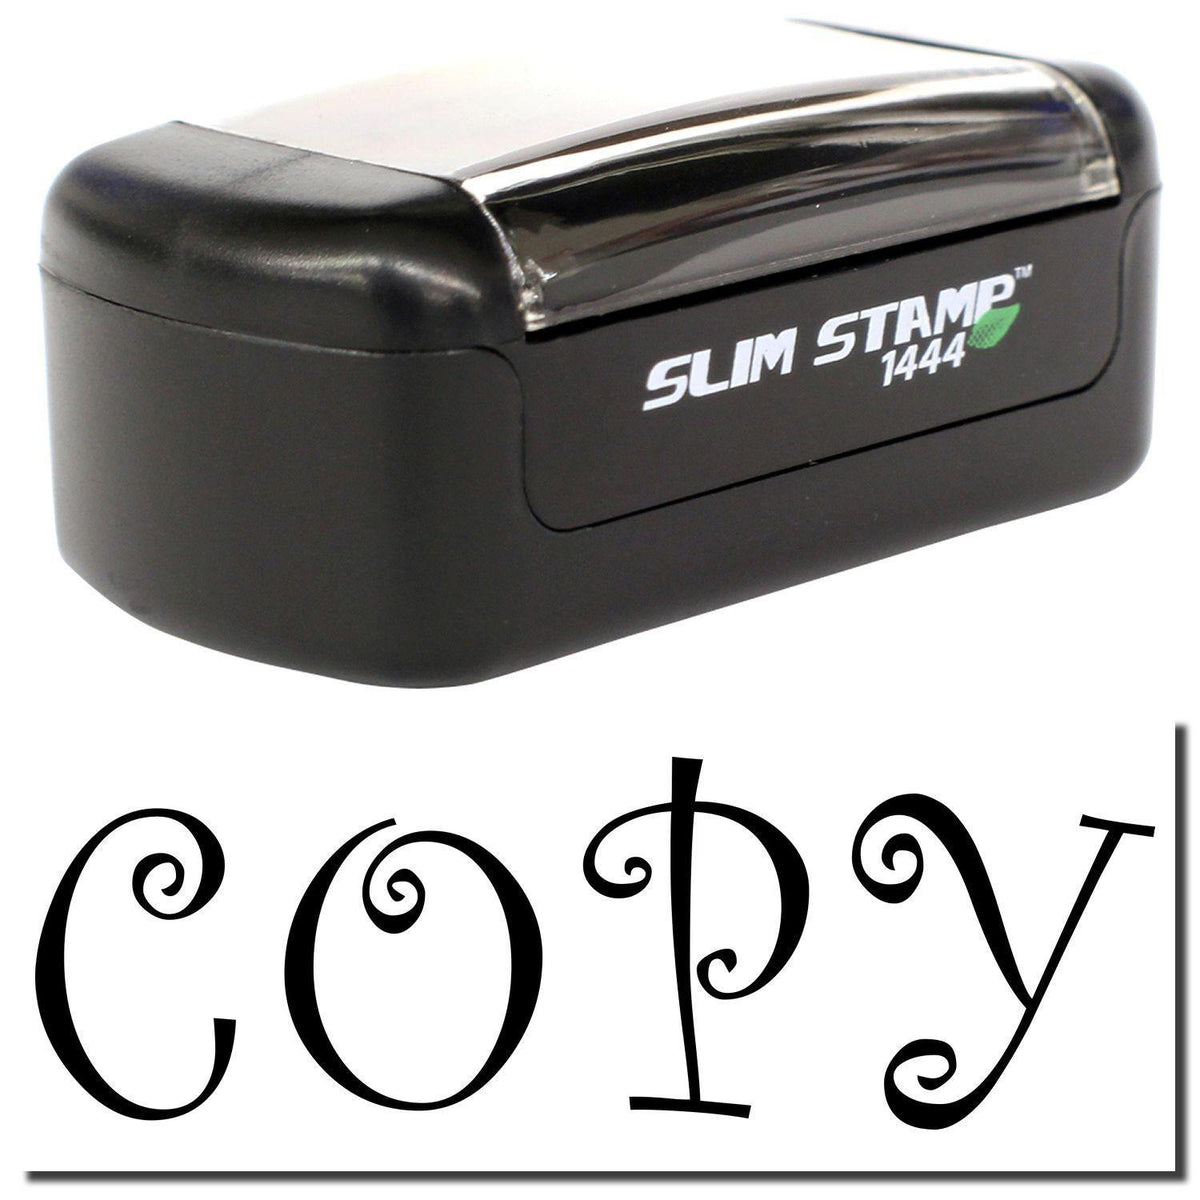 A stock office pre-inked stamp with a stamped image showing how the text &quot;COPY&quot; in a curly font is displayed after stamping.